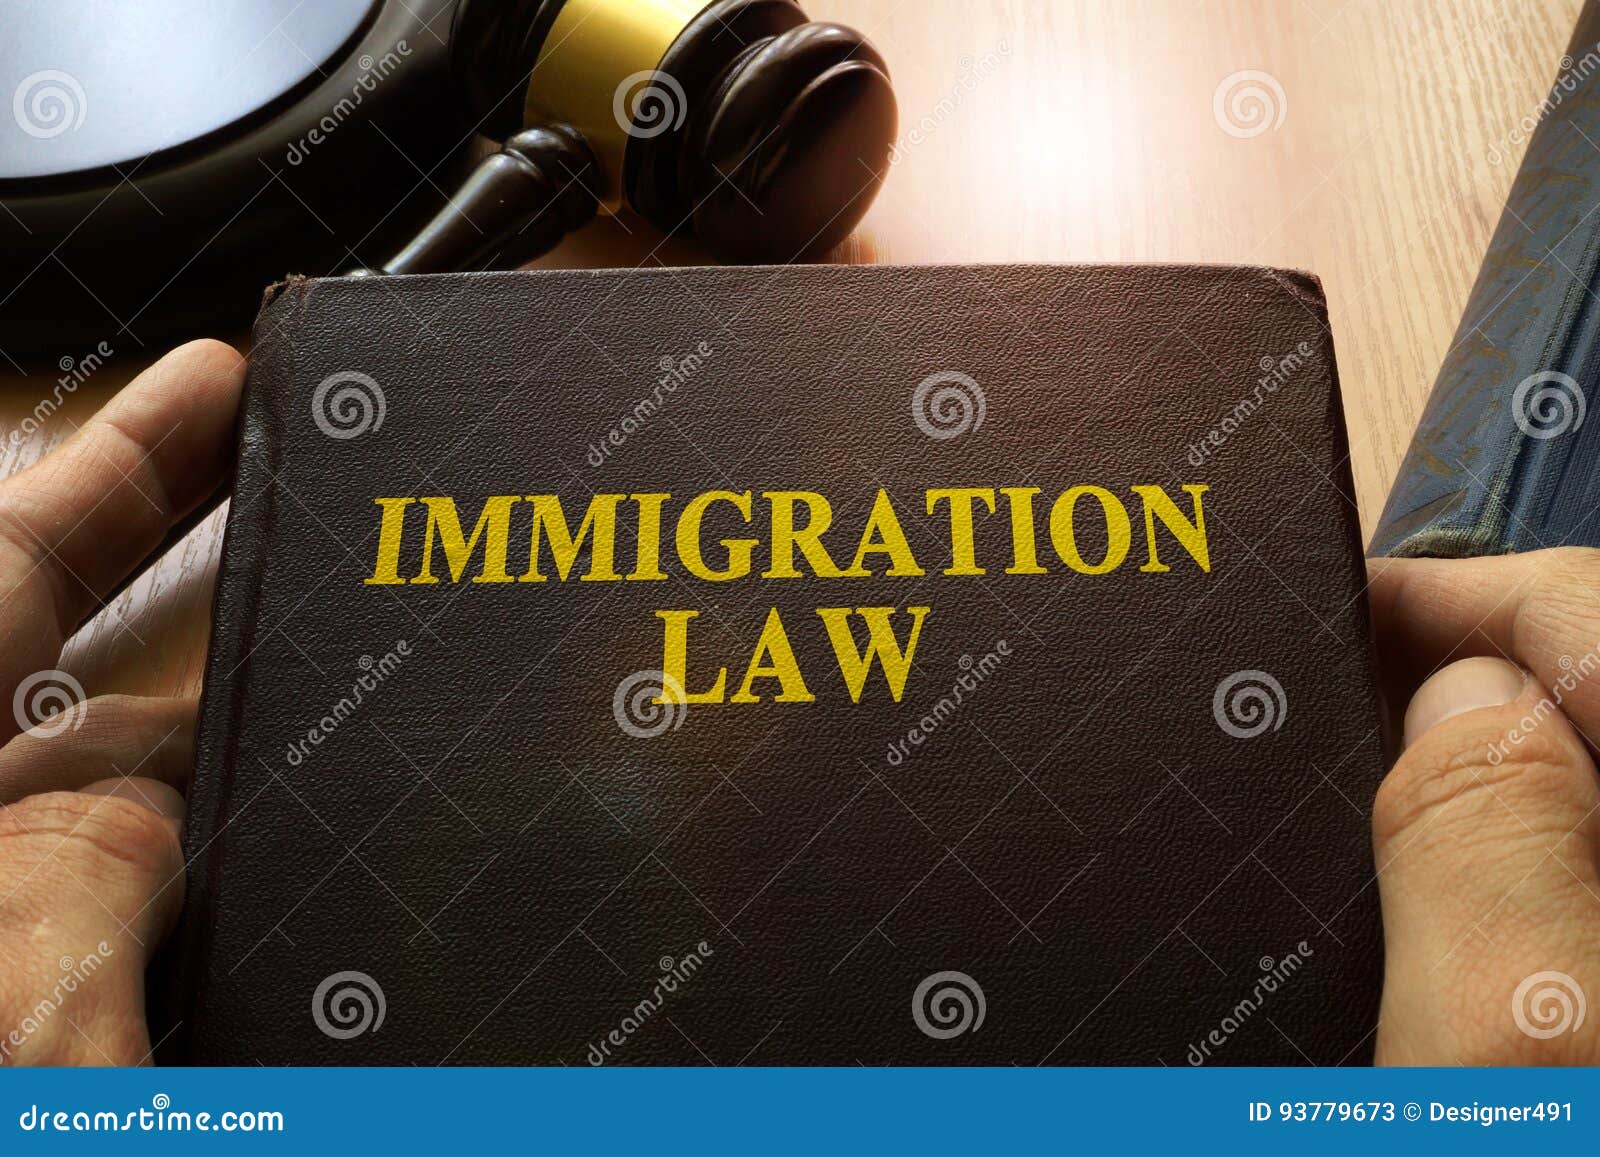 immigration law.